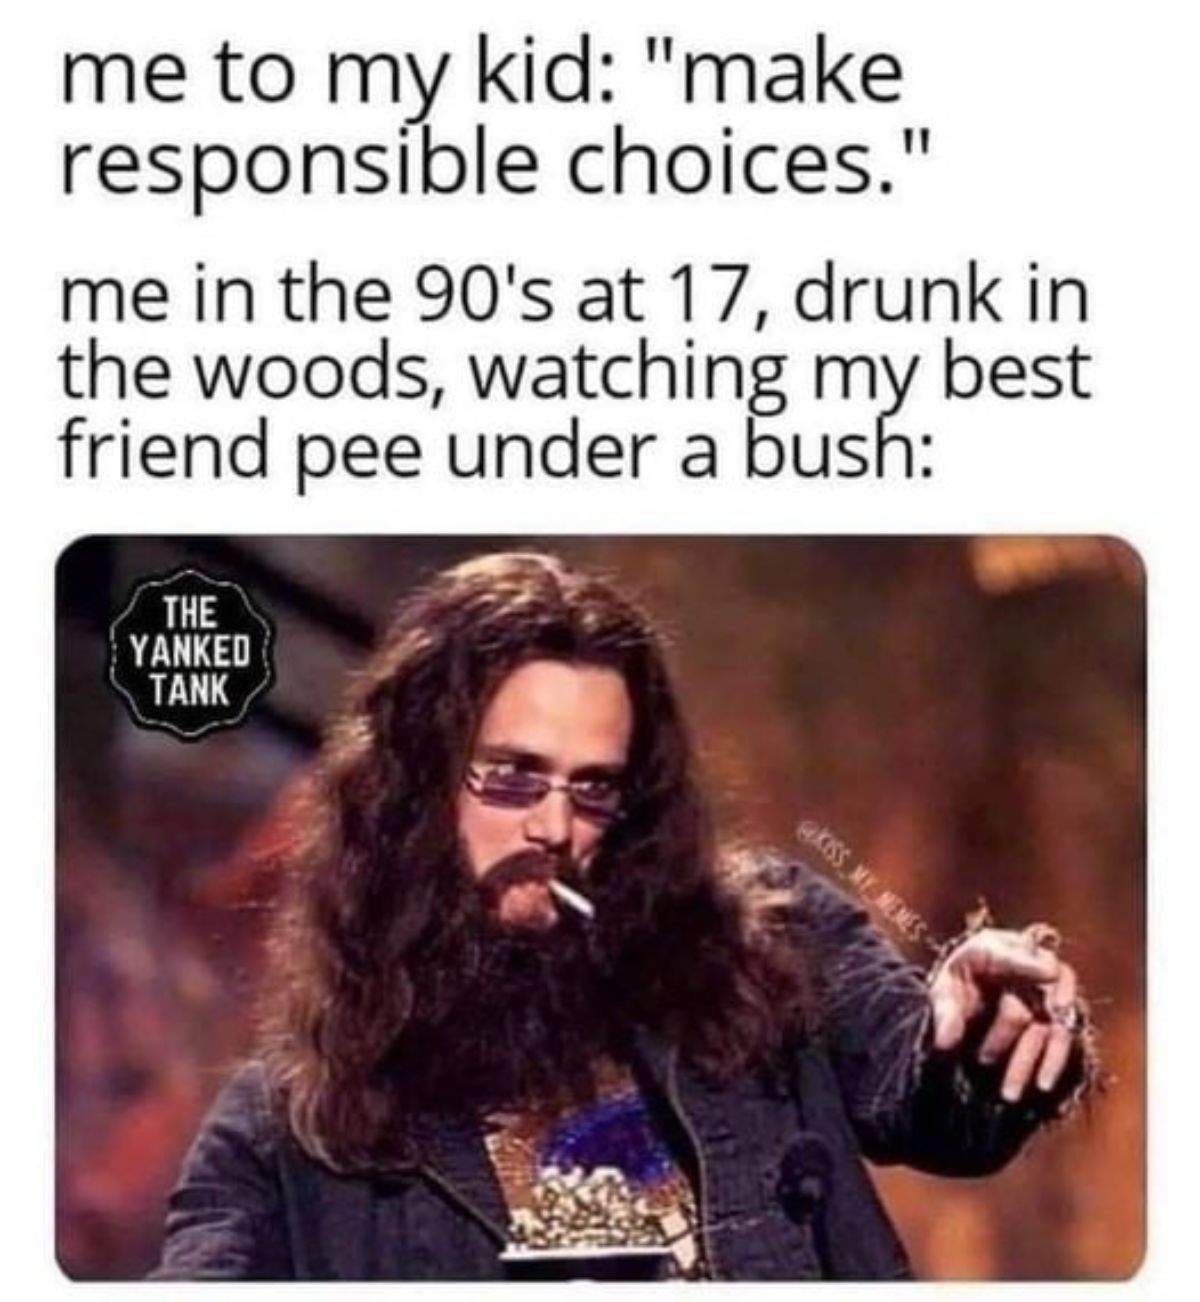 jim carrey jim morrison - me to my kid "make responsible choices." me in the 90's at 17, drunk in the woods, watching my best. friend pee under a bush The Yanked Tank My Memes